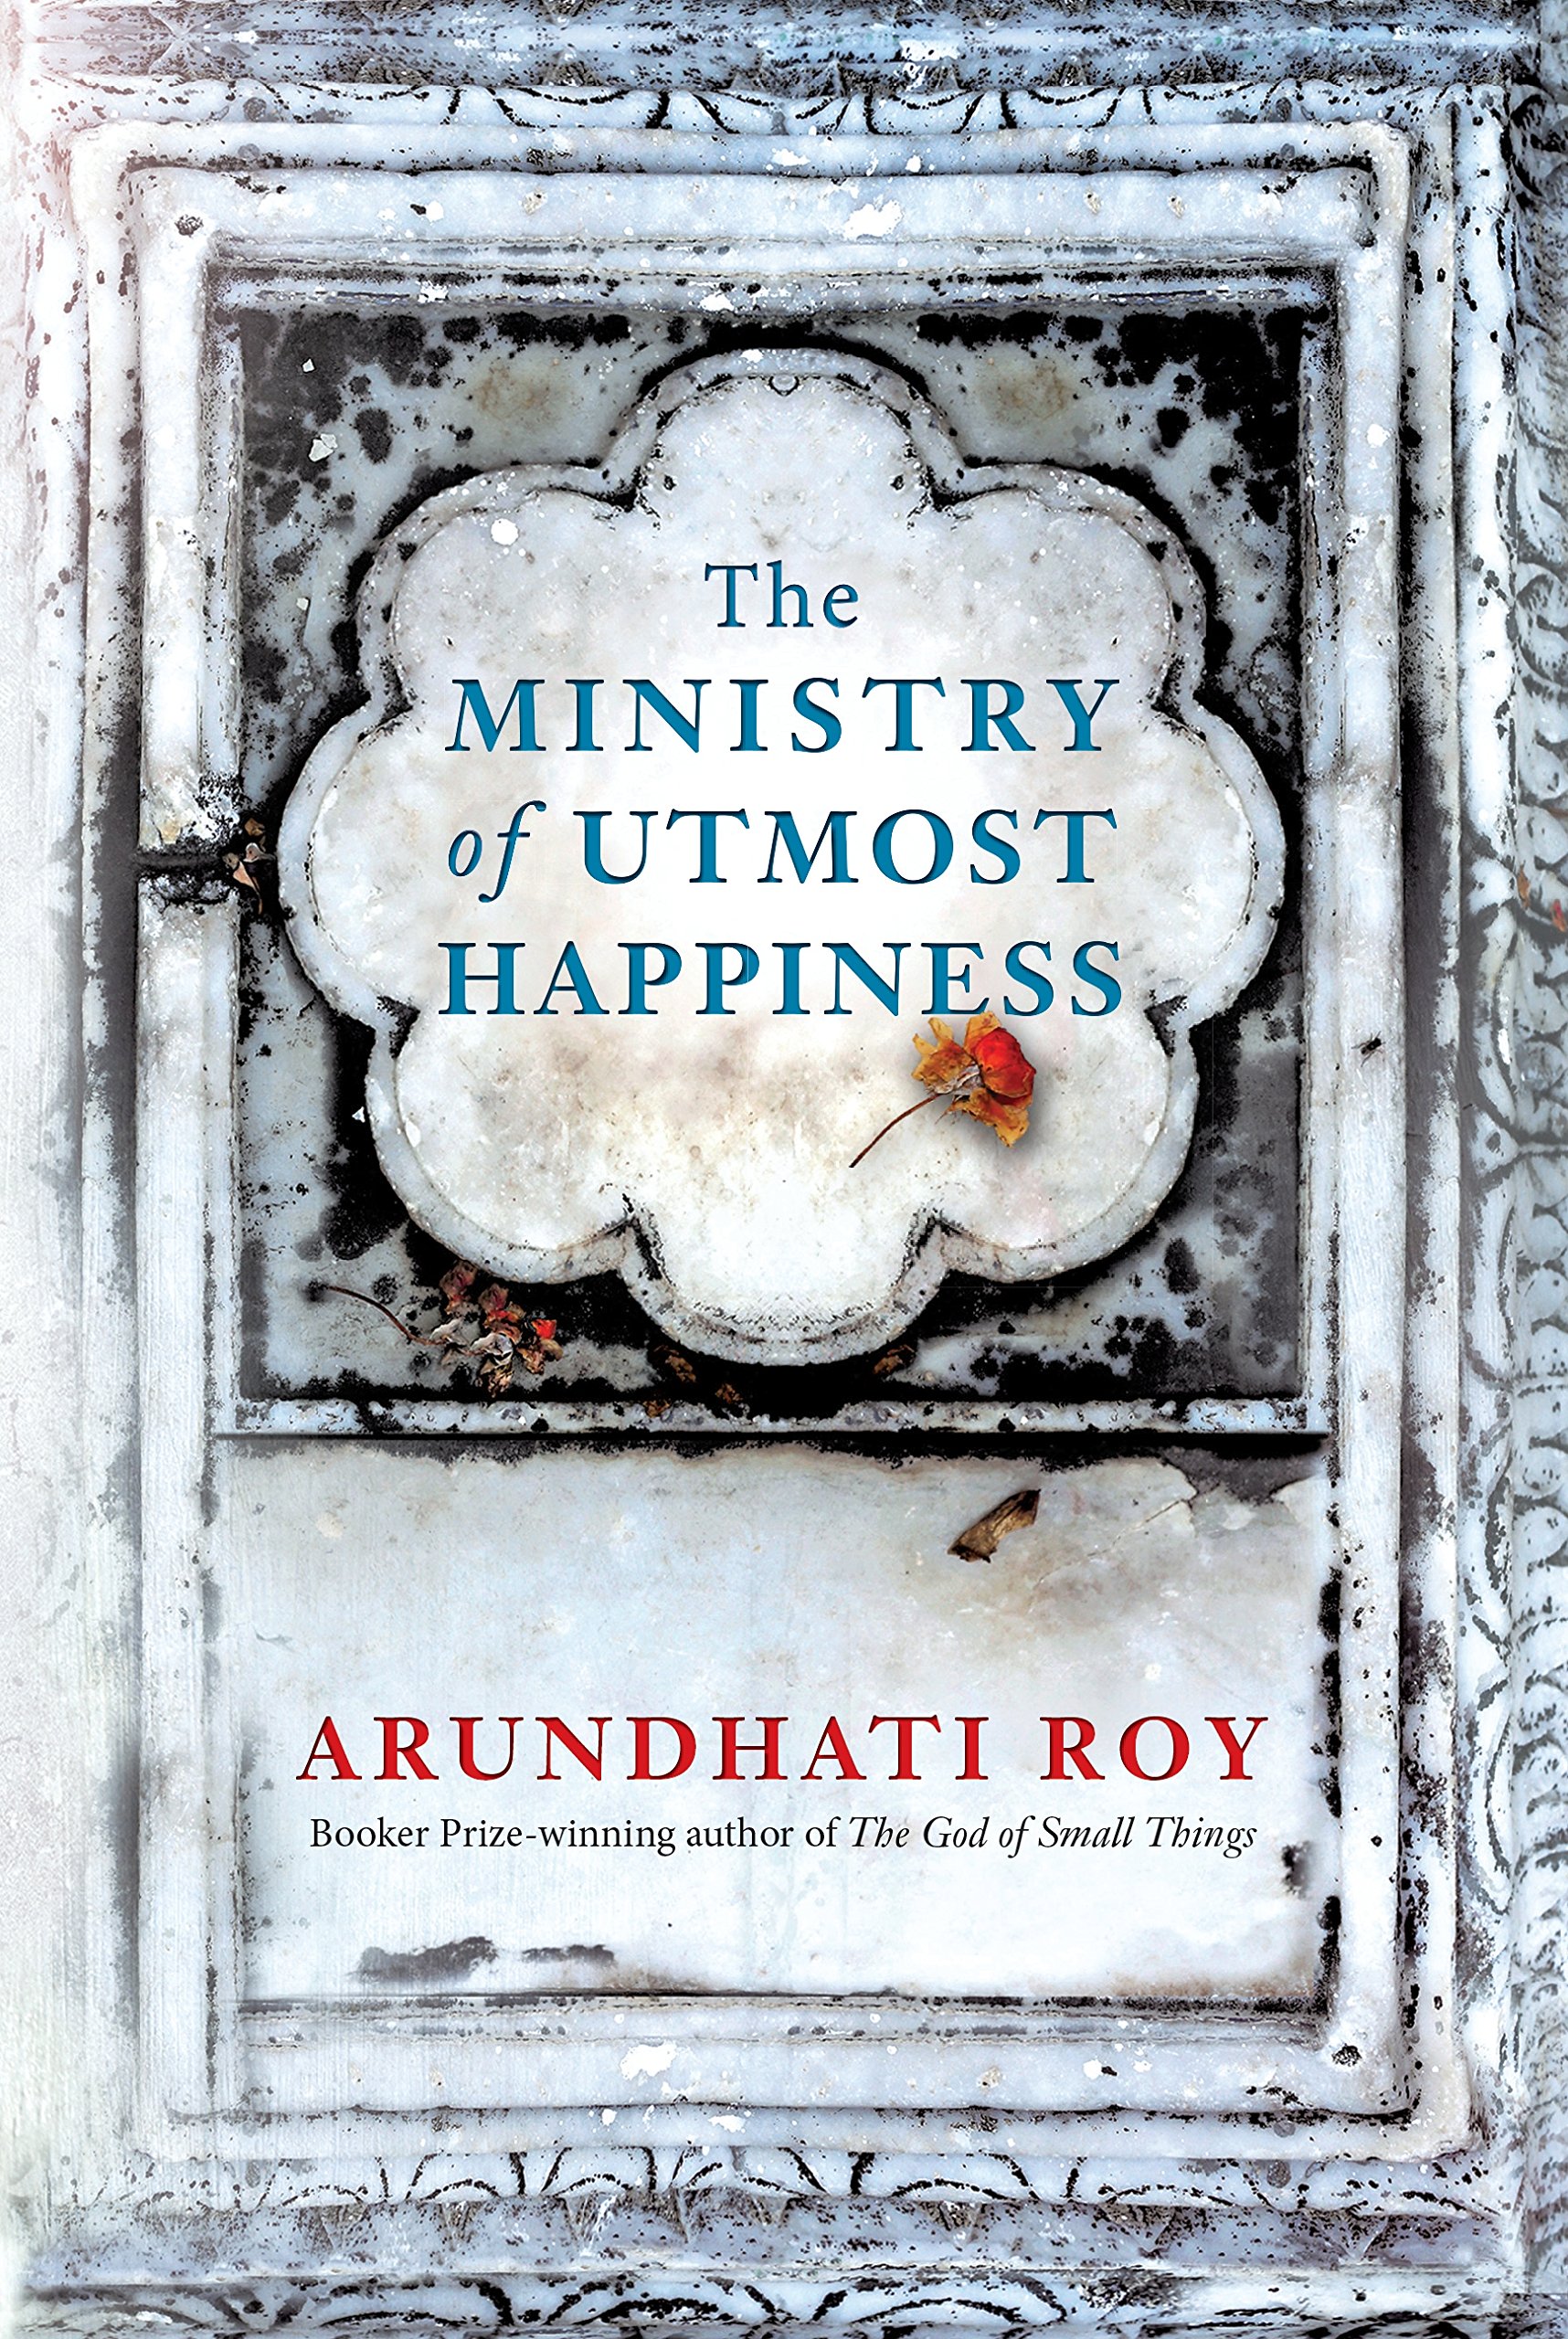 Cover of Arundhati Roy′s "The Ministry of Utmost Happiness" (published by Hamish Hamilton)